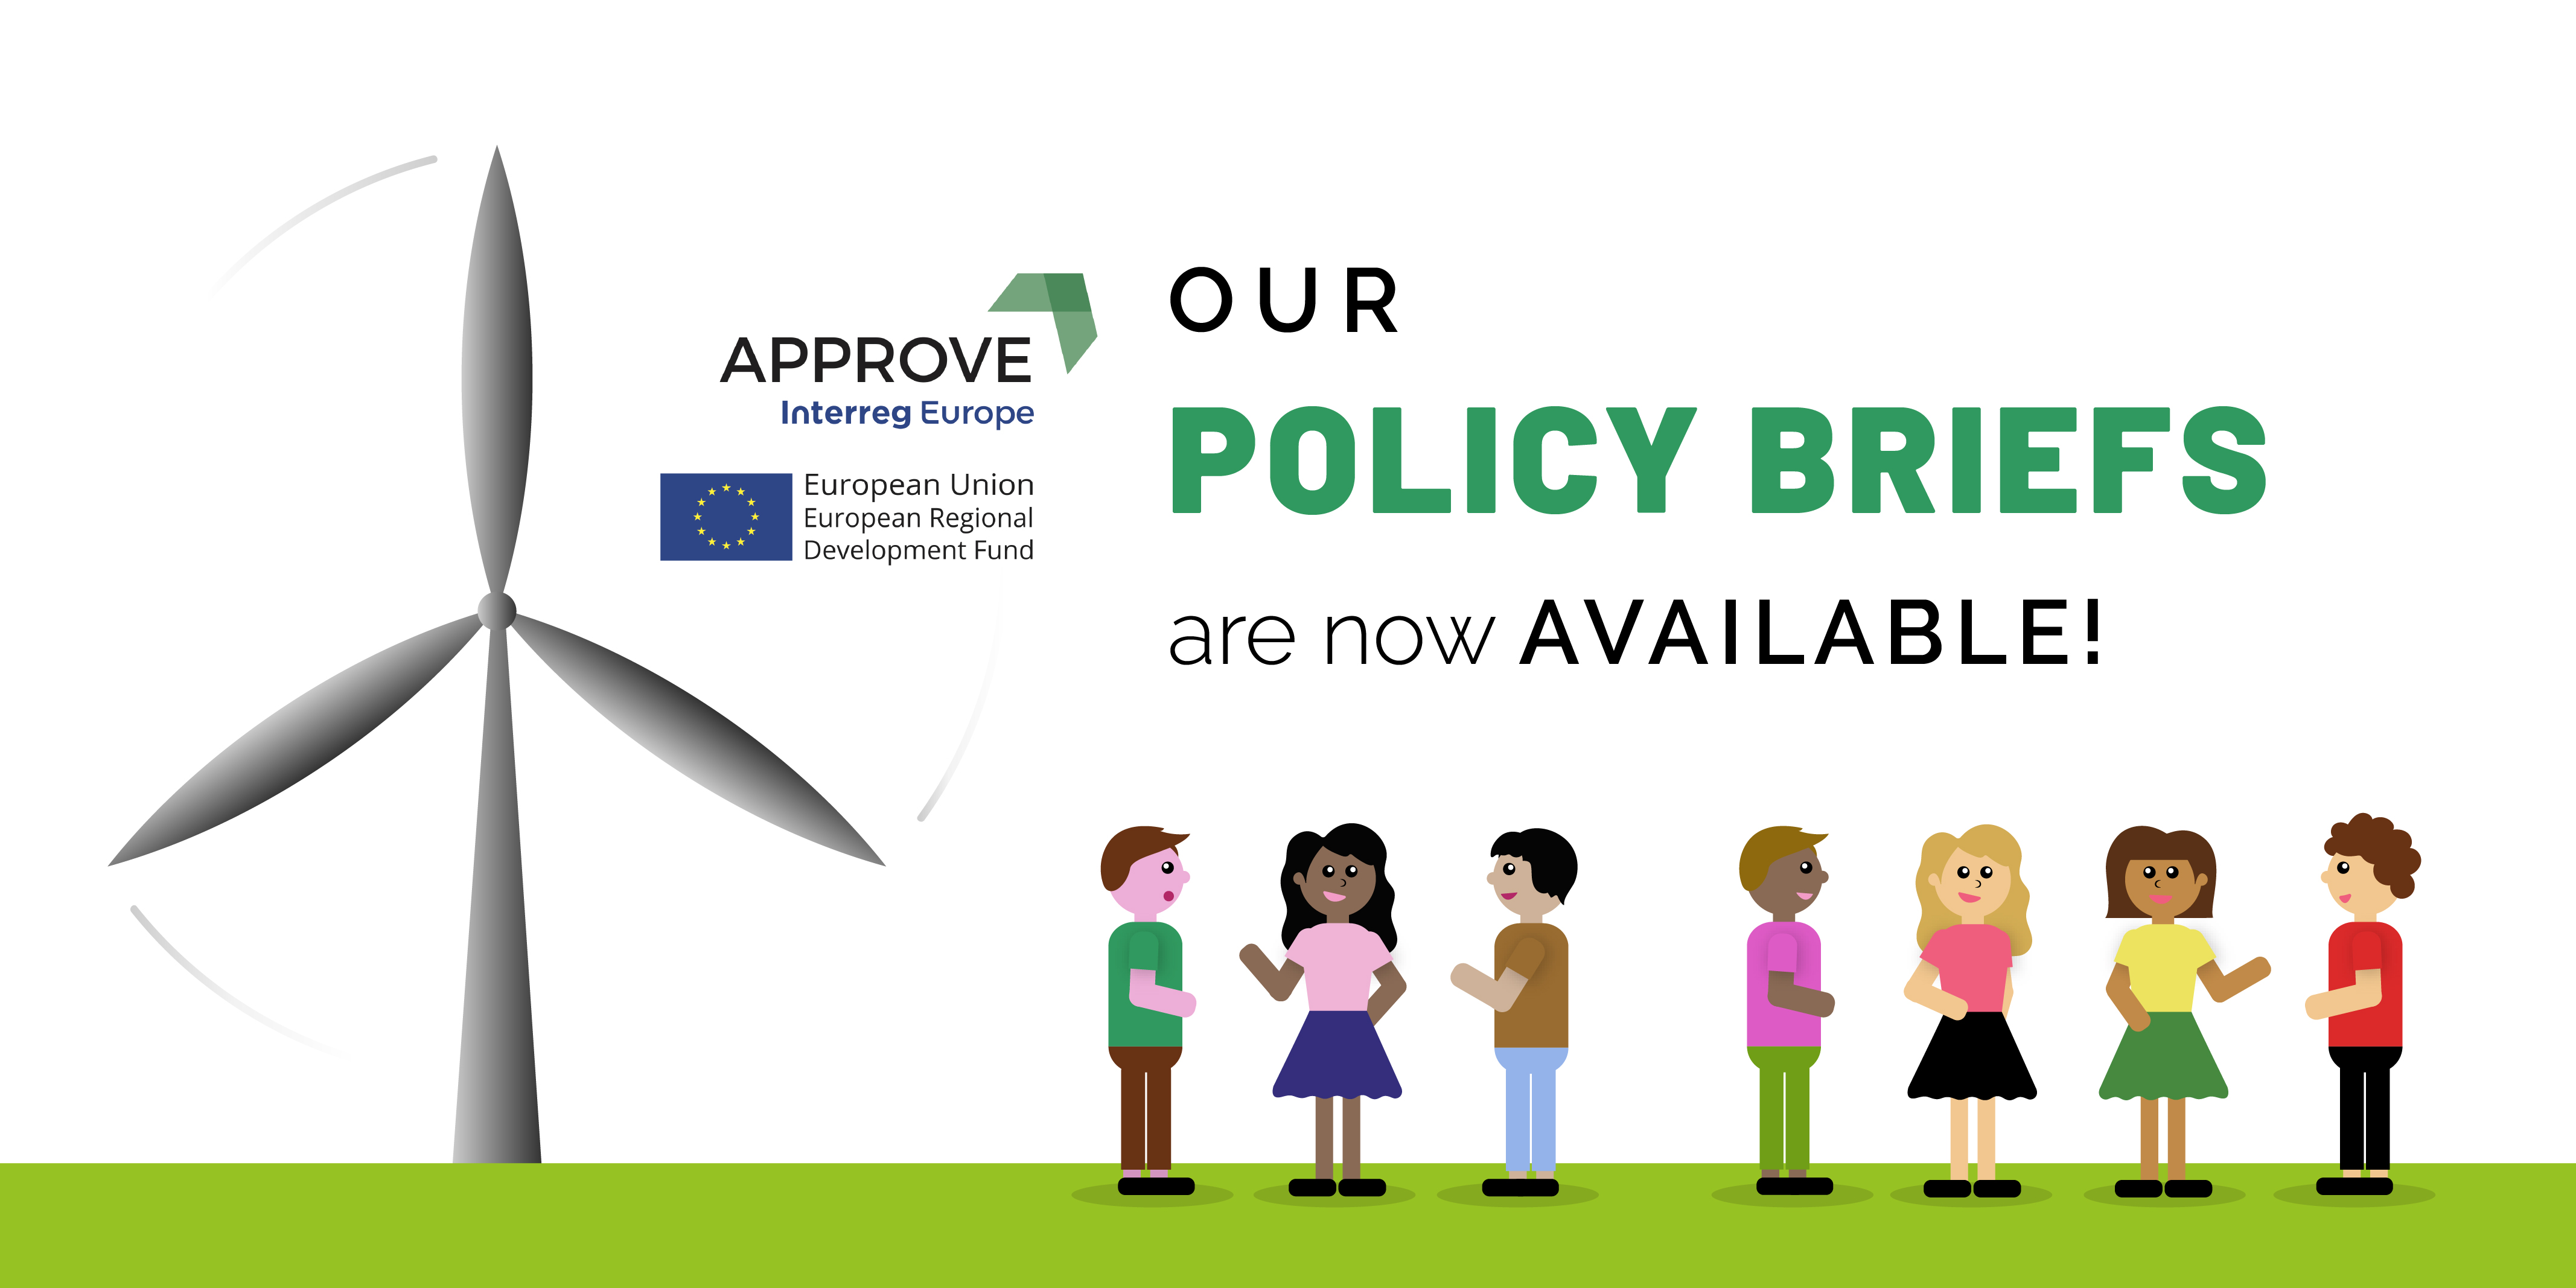 APPROVE Policy Briefs now available